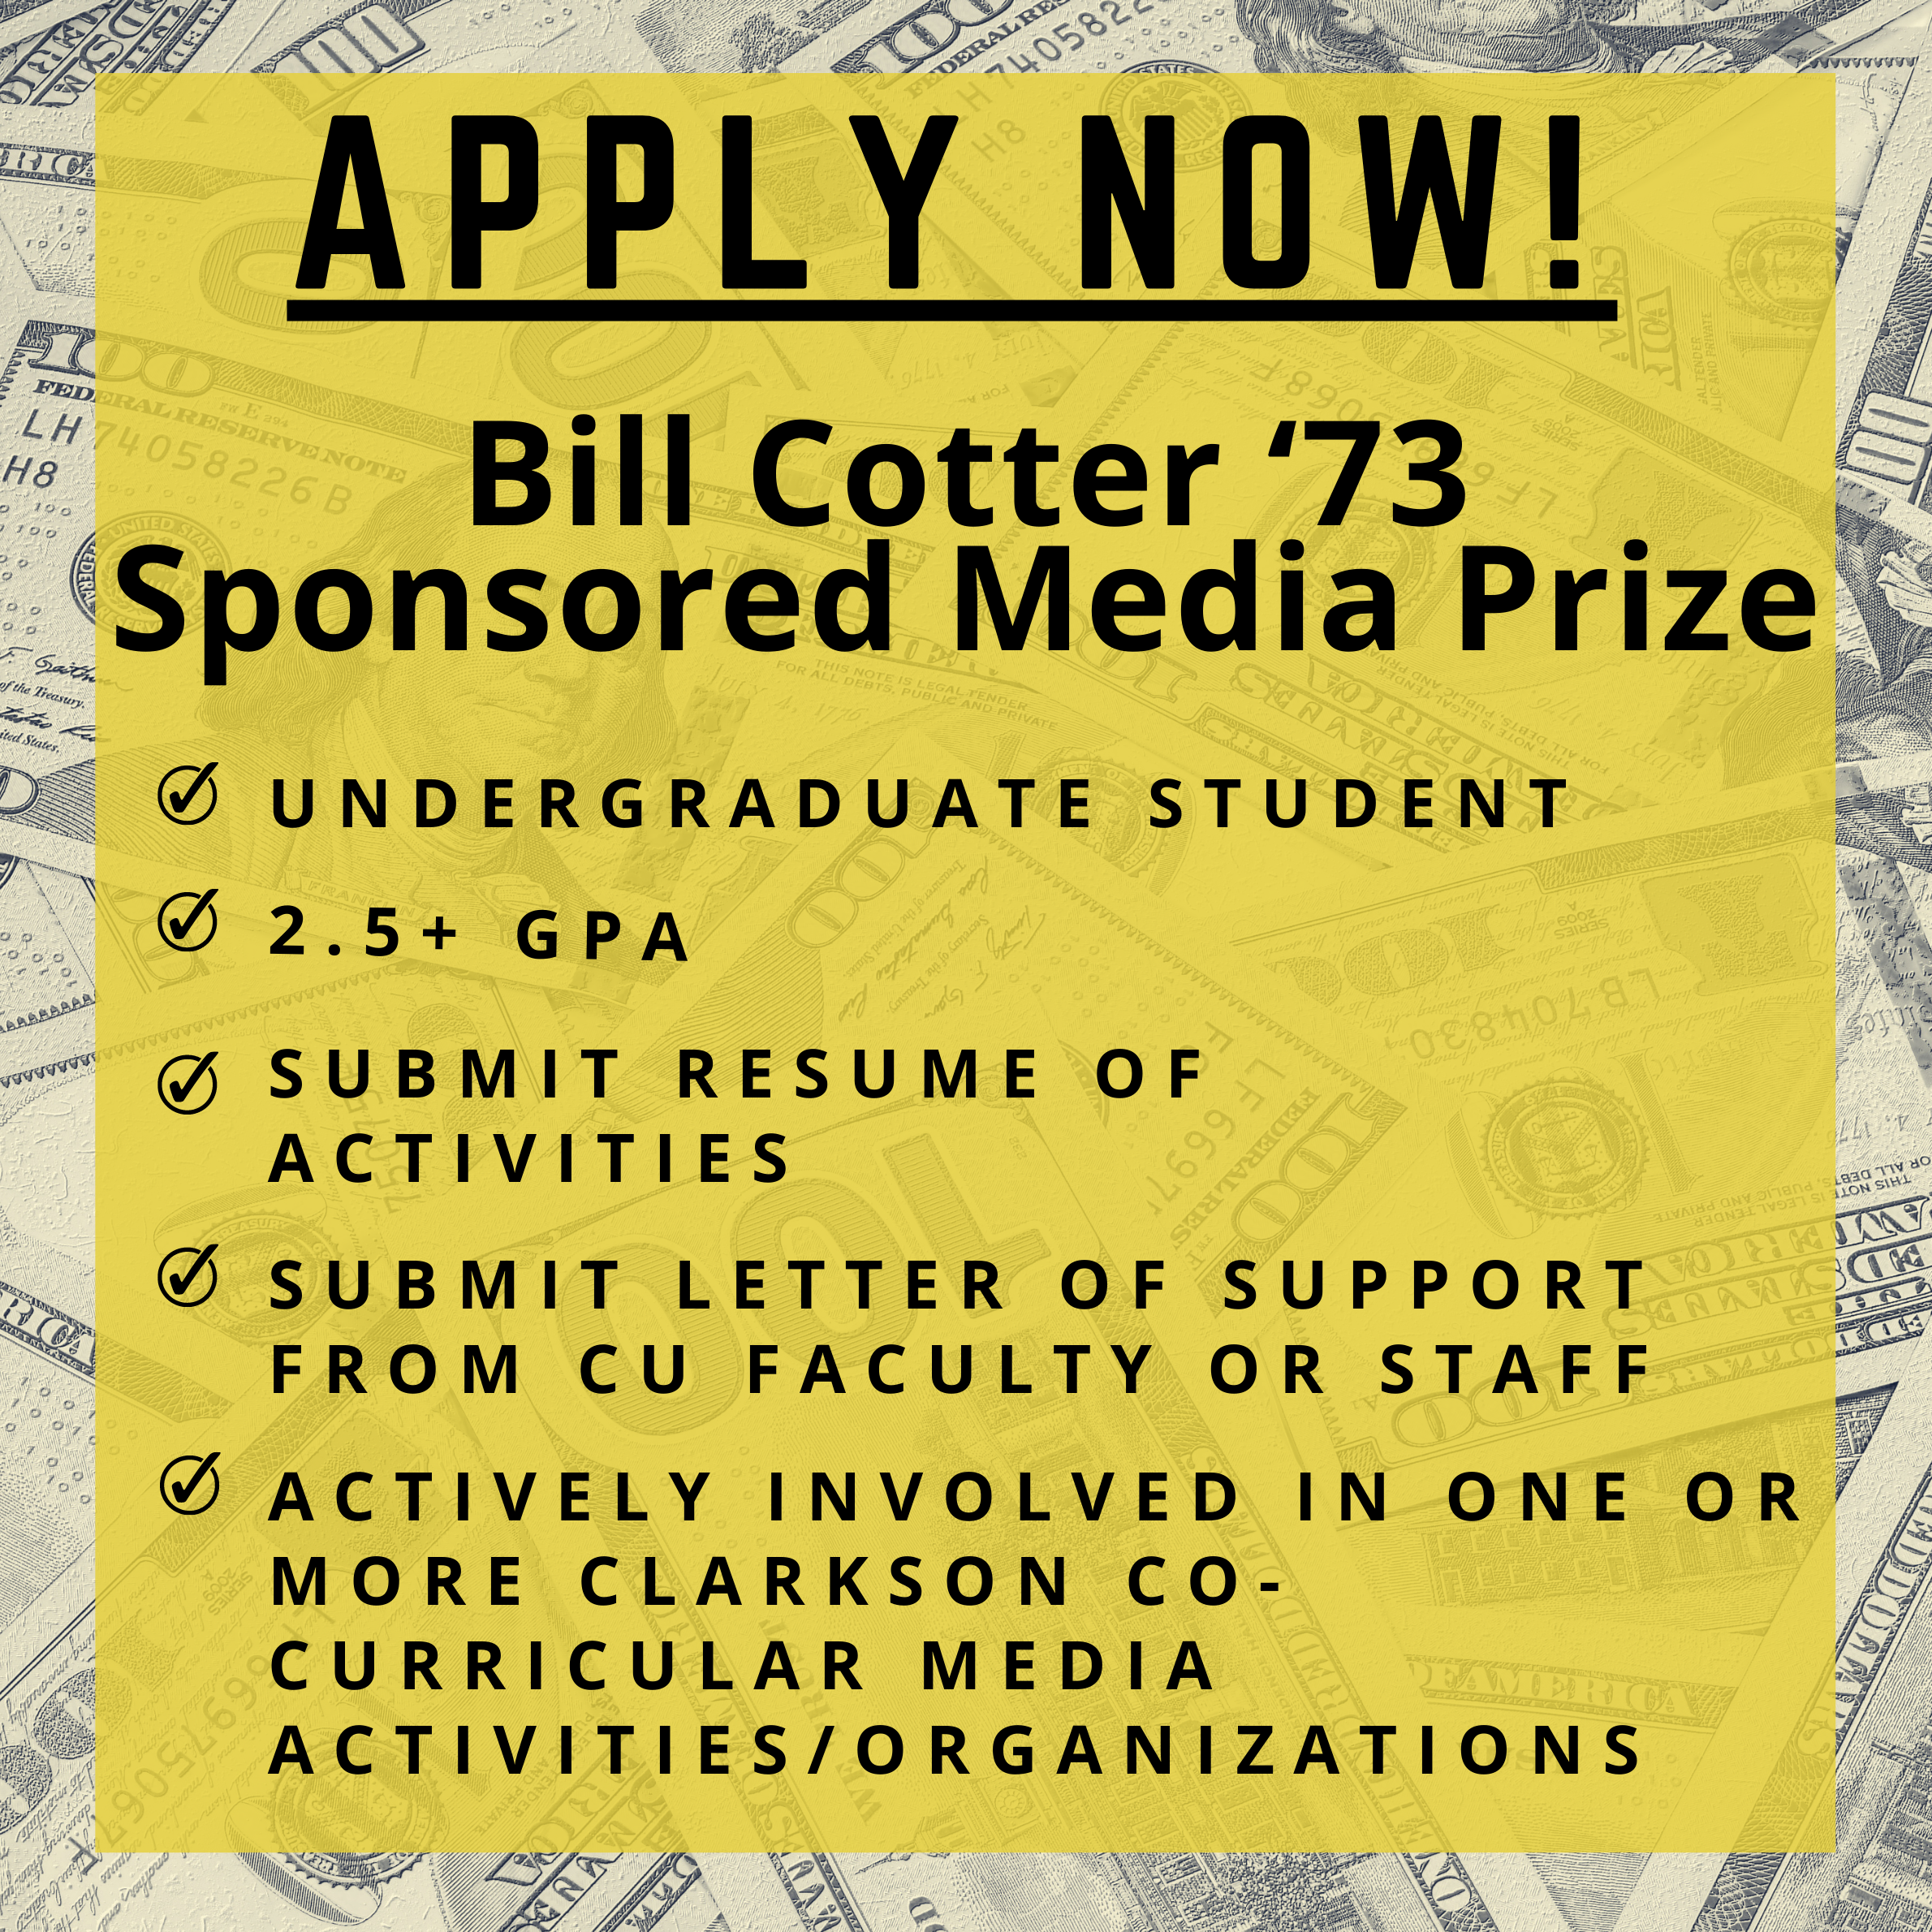 Time is Running Out to Apply for the Bill Cotter ‘73 Sponsored Media Prize!